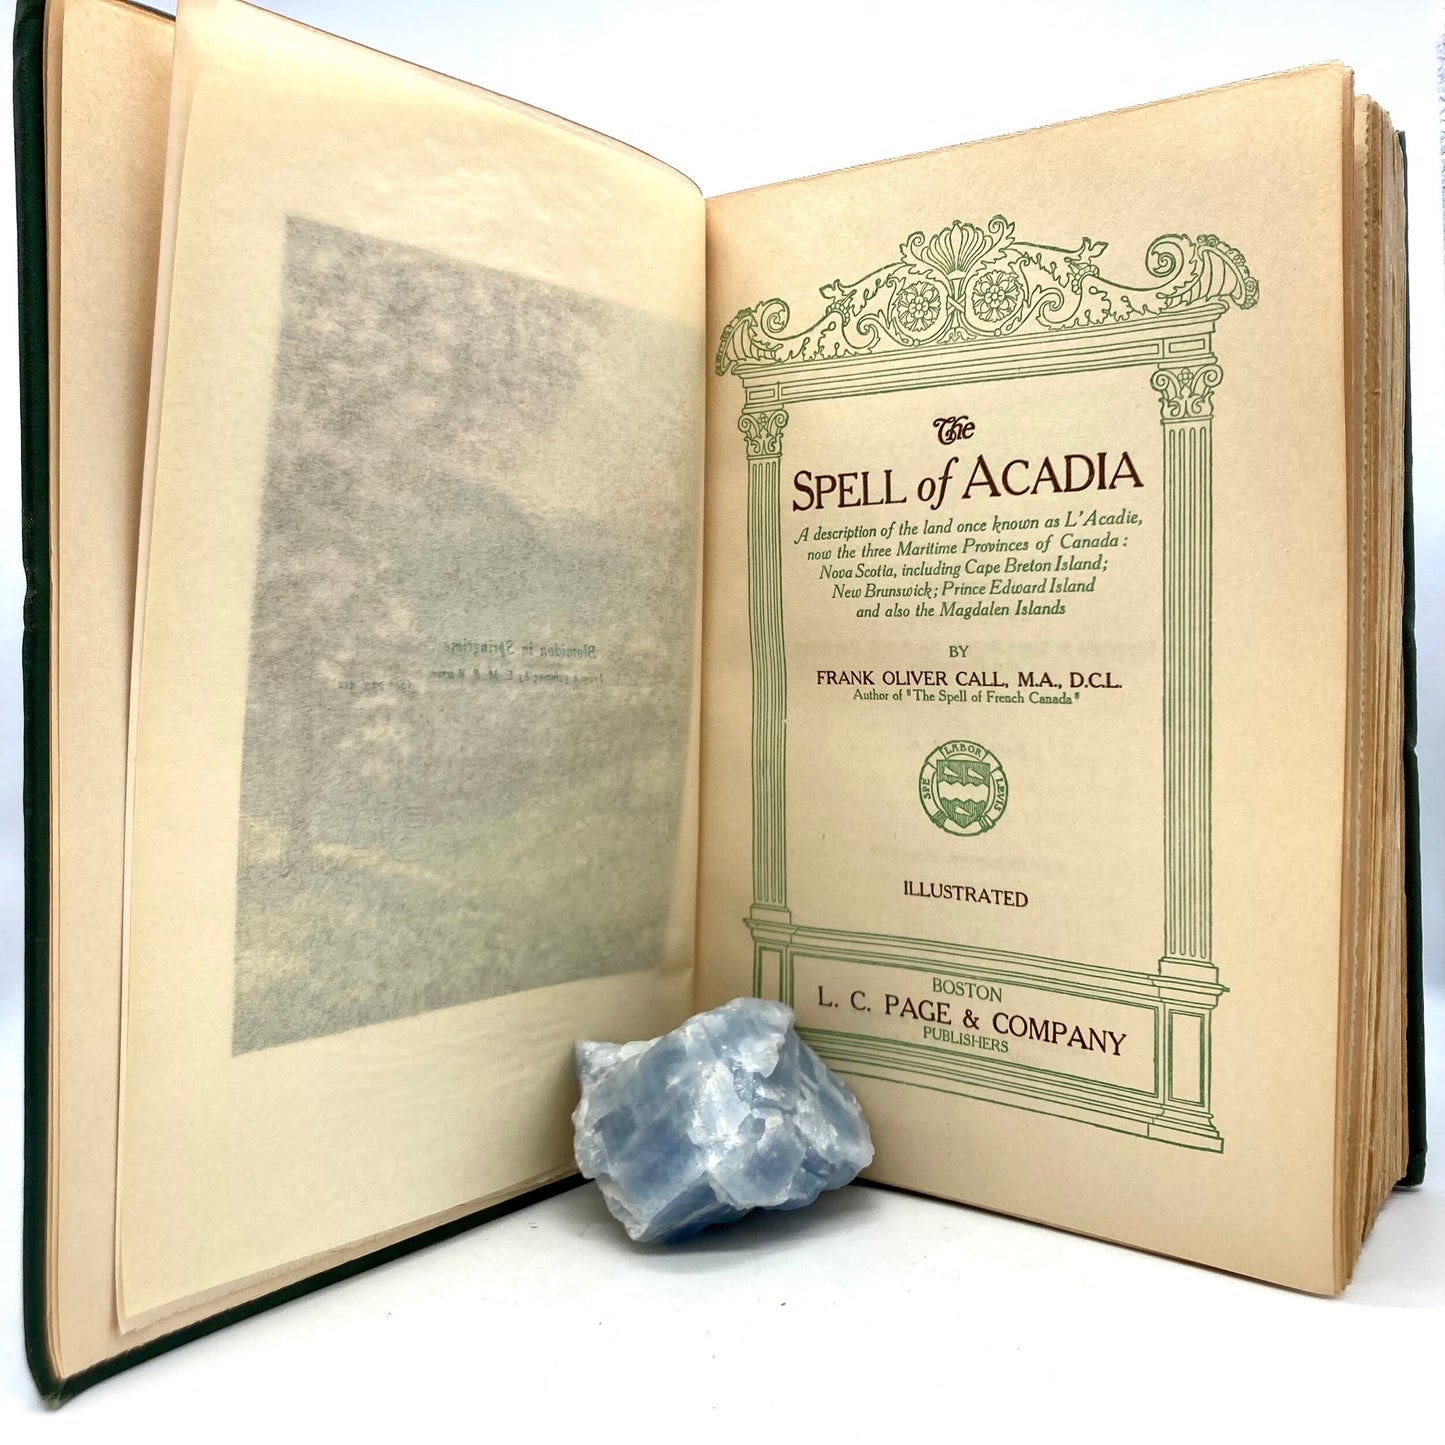 CALL, Frank Oliver "The Spell of Acadia" [LC Page, 1930] - Buzz Bookstore